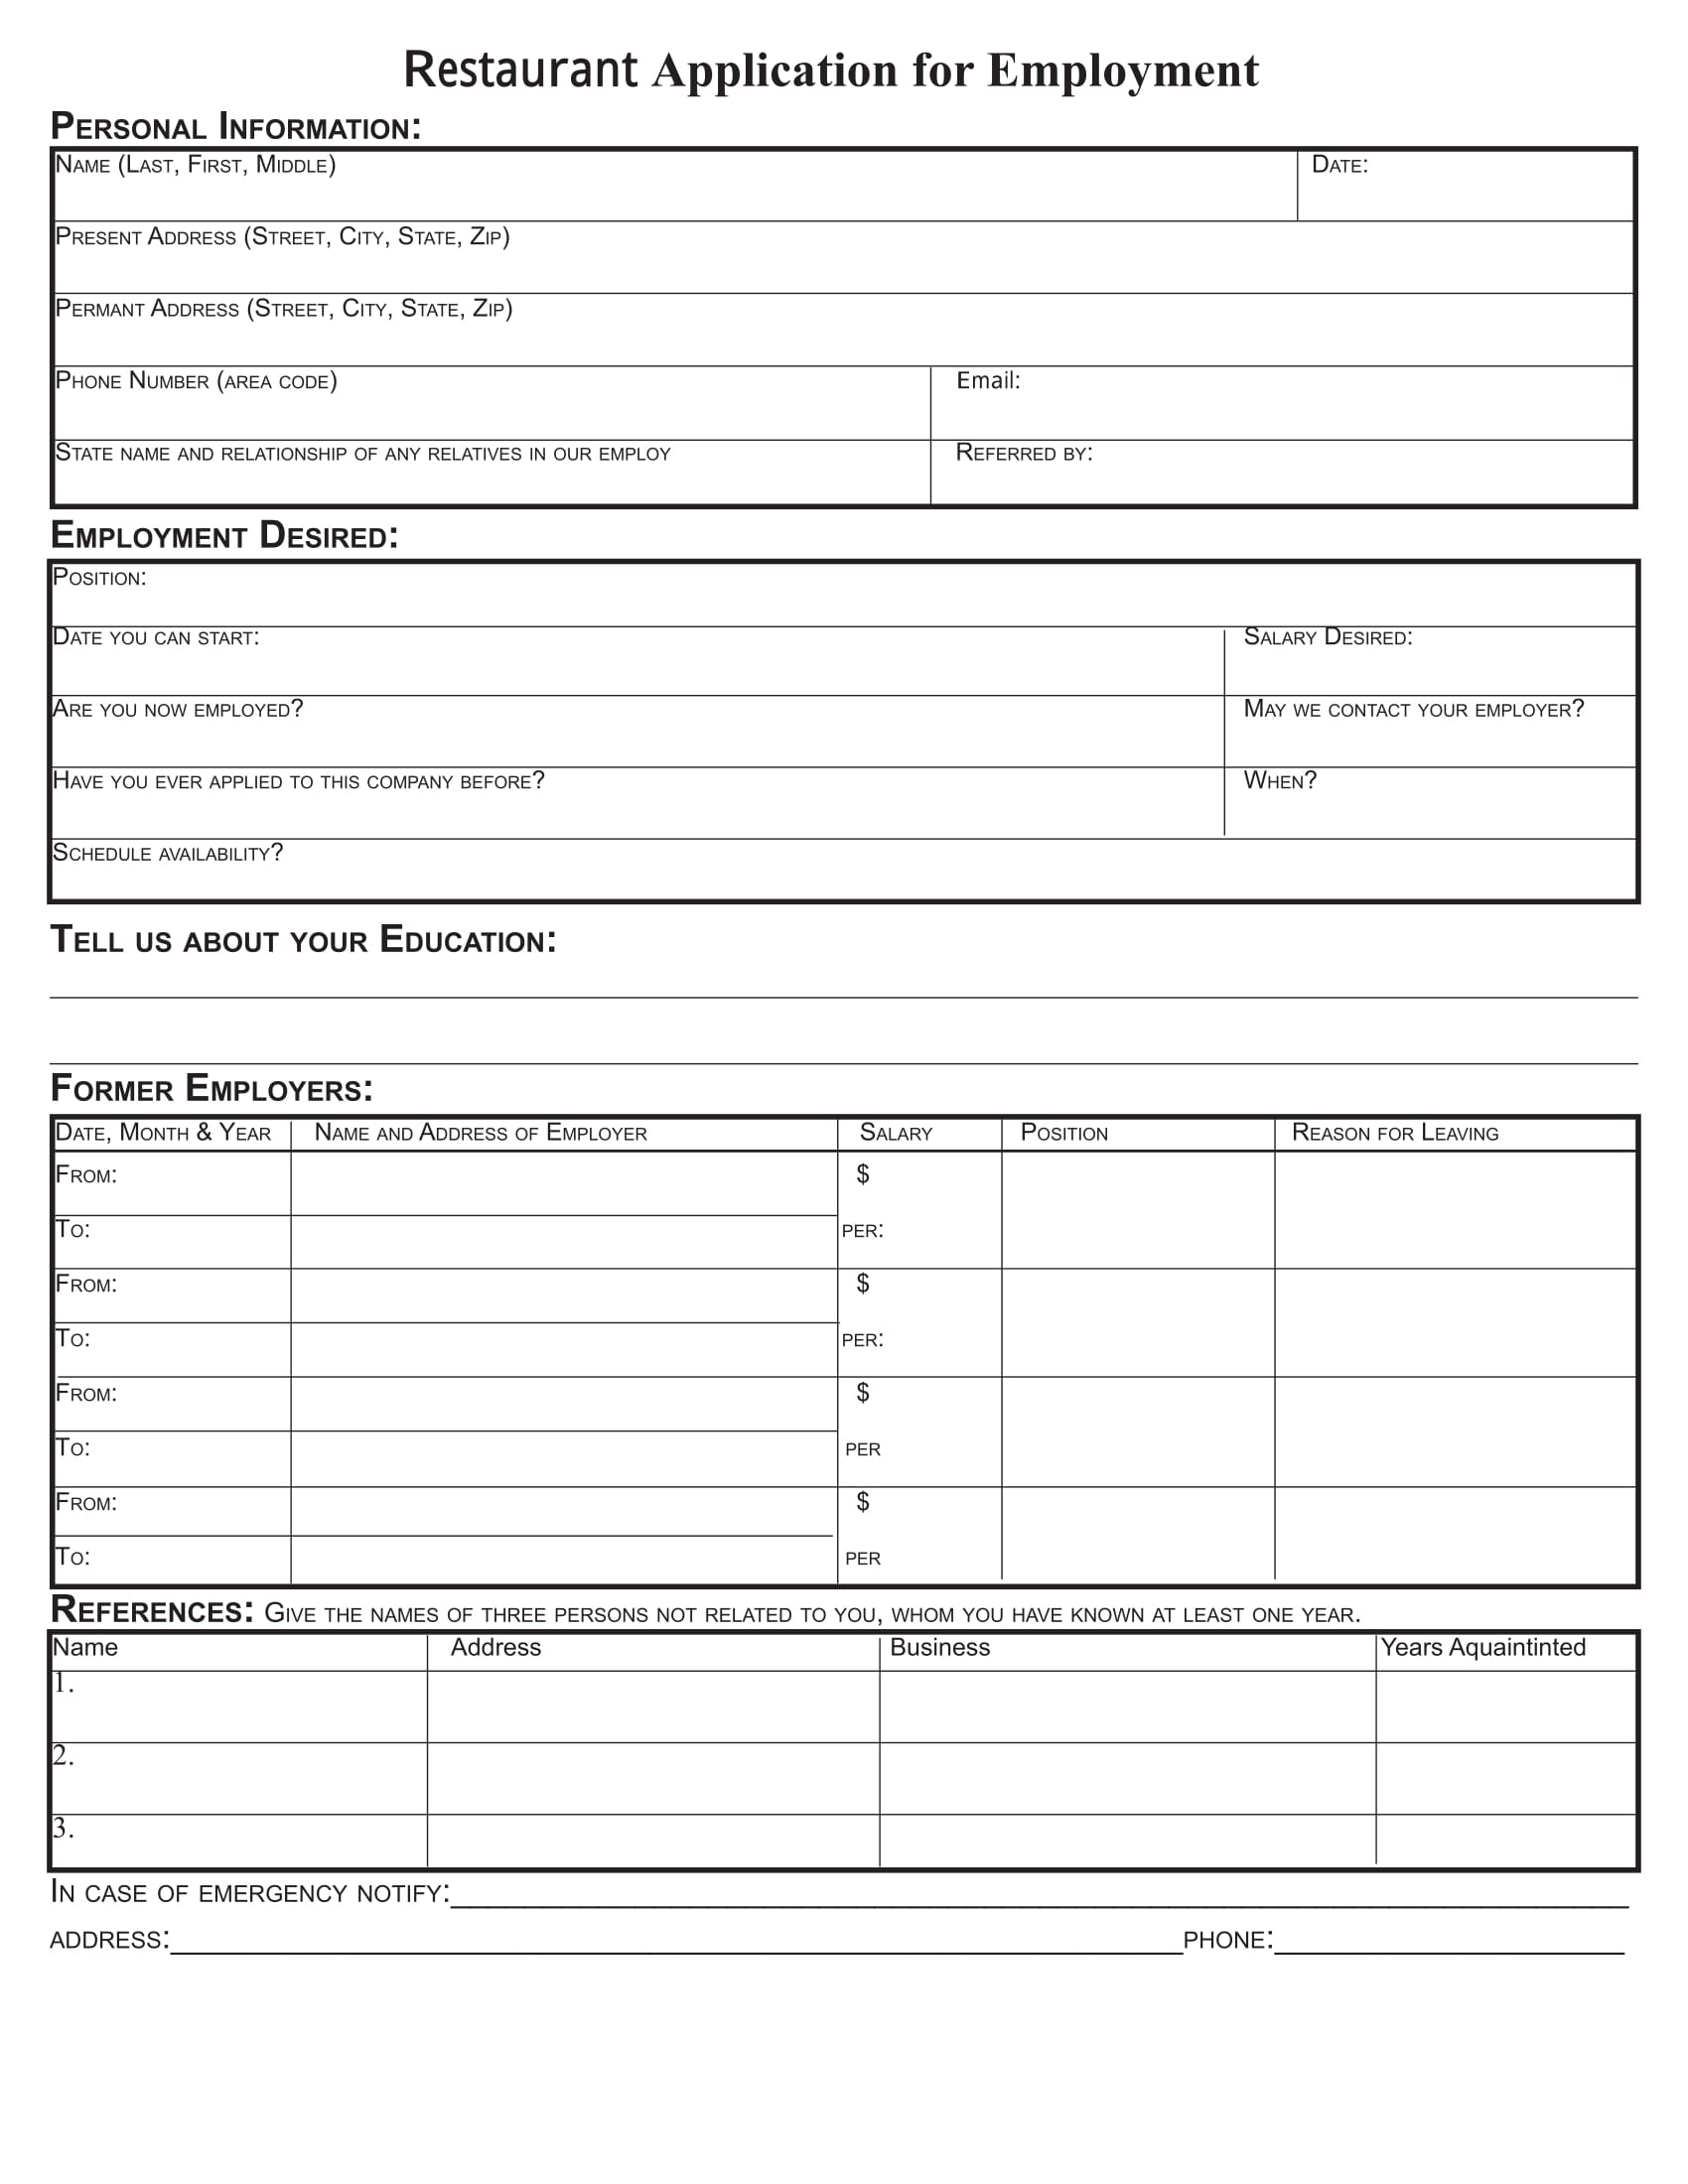 FREE 25+ Restaurant Application Forms in PDF  MS Word With Job Application Template Word Document